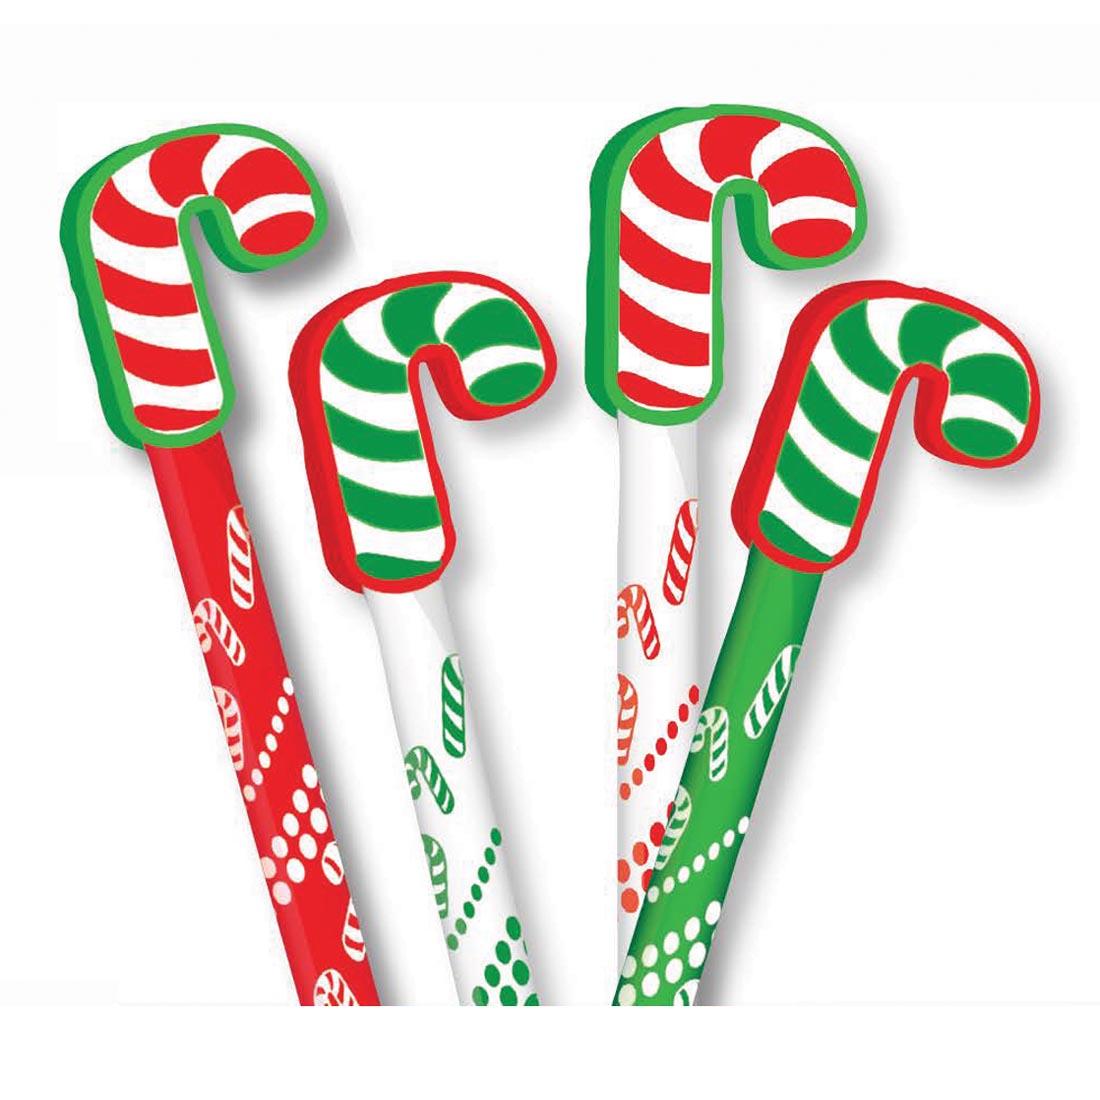 Red, white and green pencil topper erasers shaped like candy canes, shown on the tops of pencils